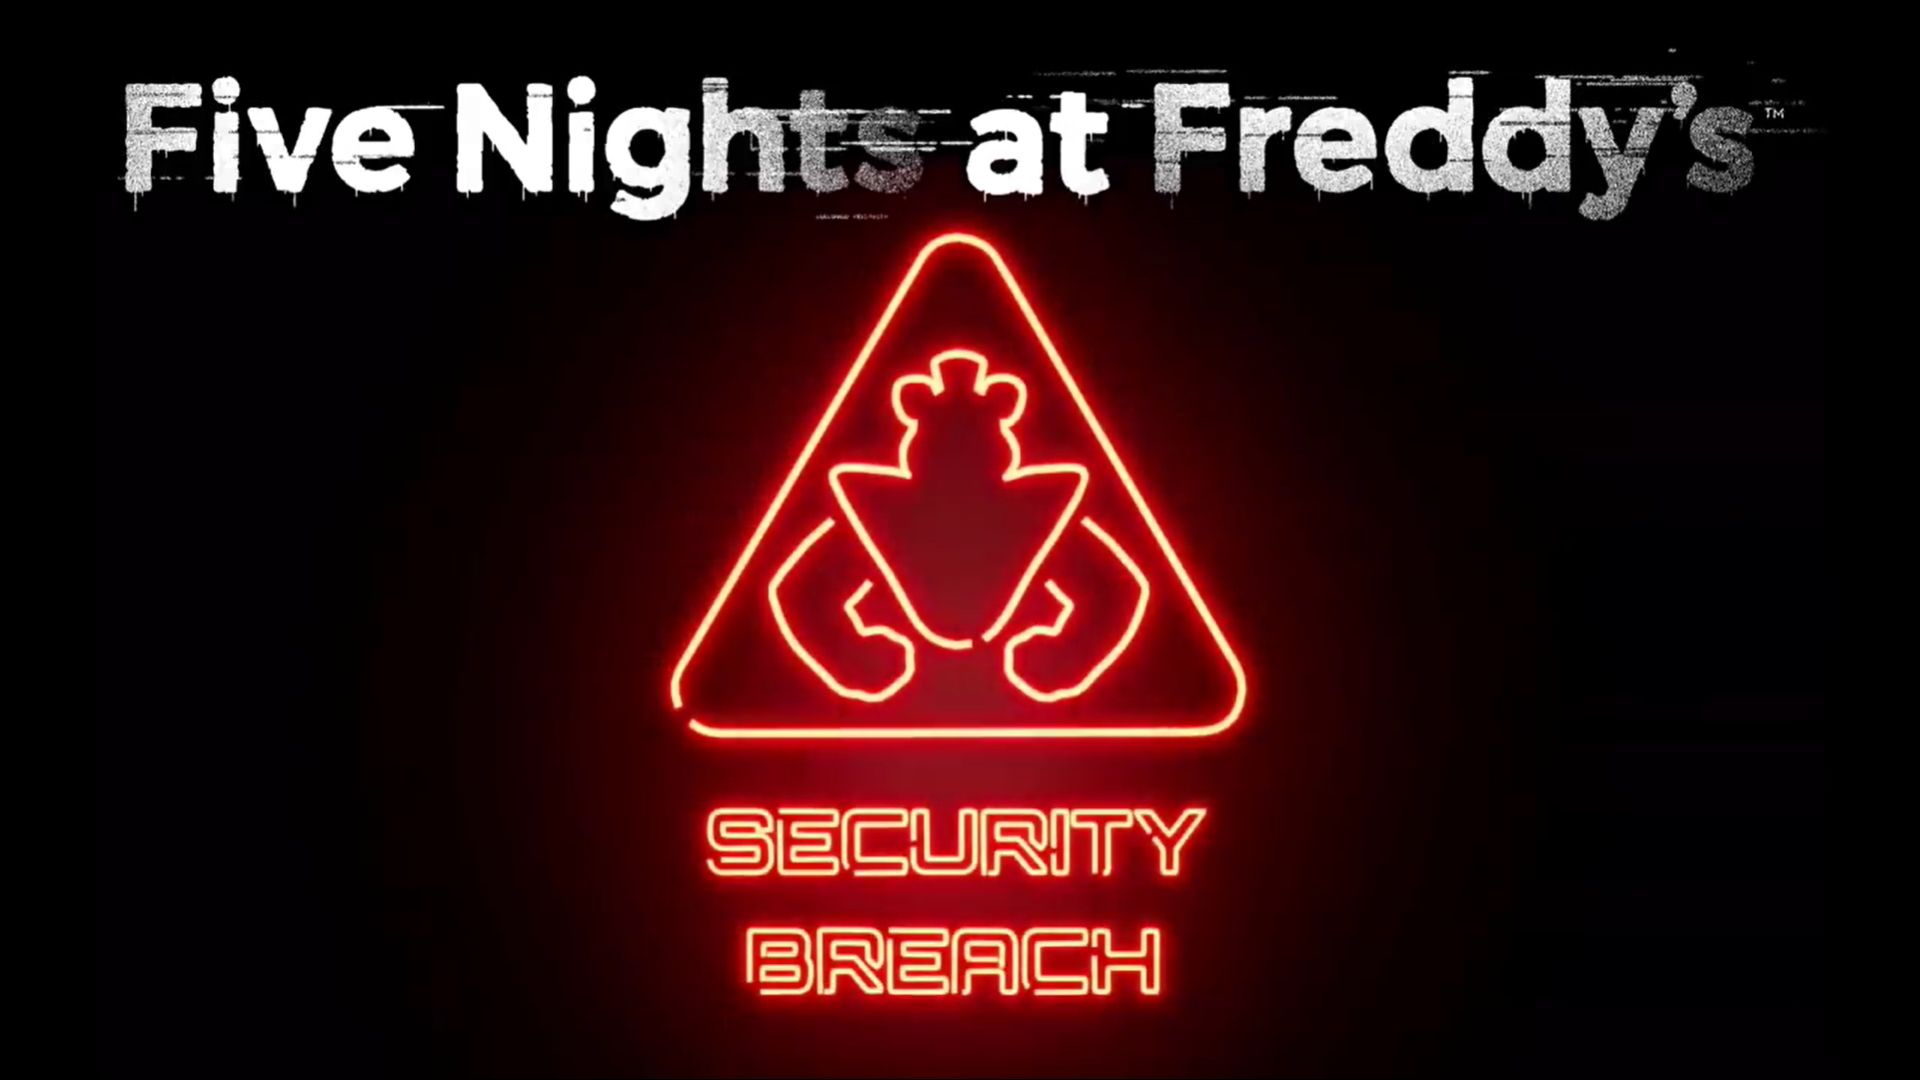 Next level horror teased- Five Nights at Freddy's: Security Breach coming to PS PS and PC